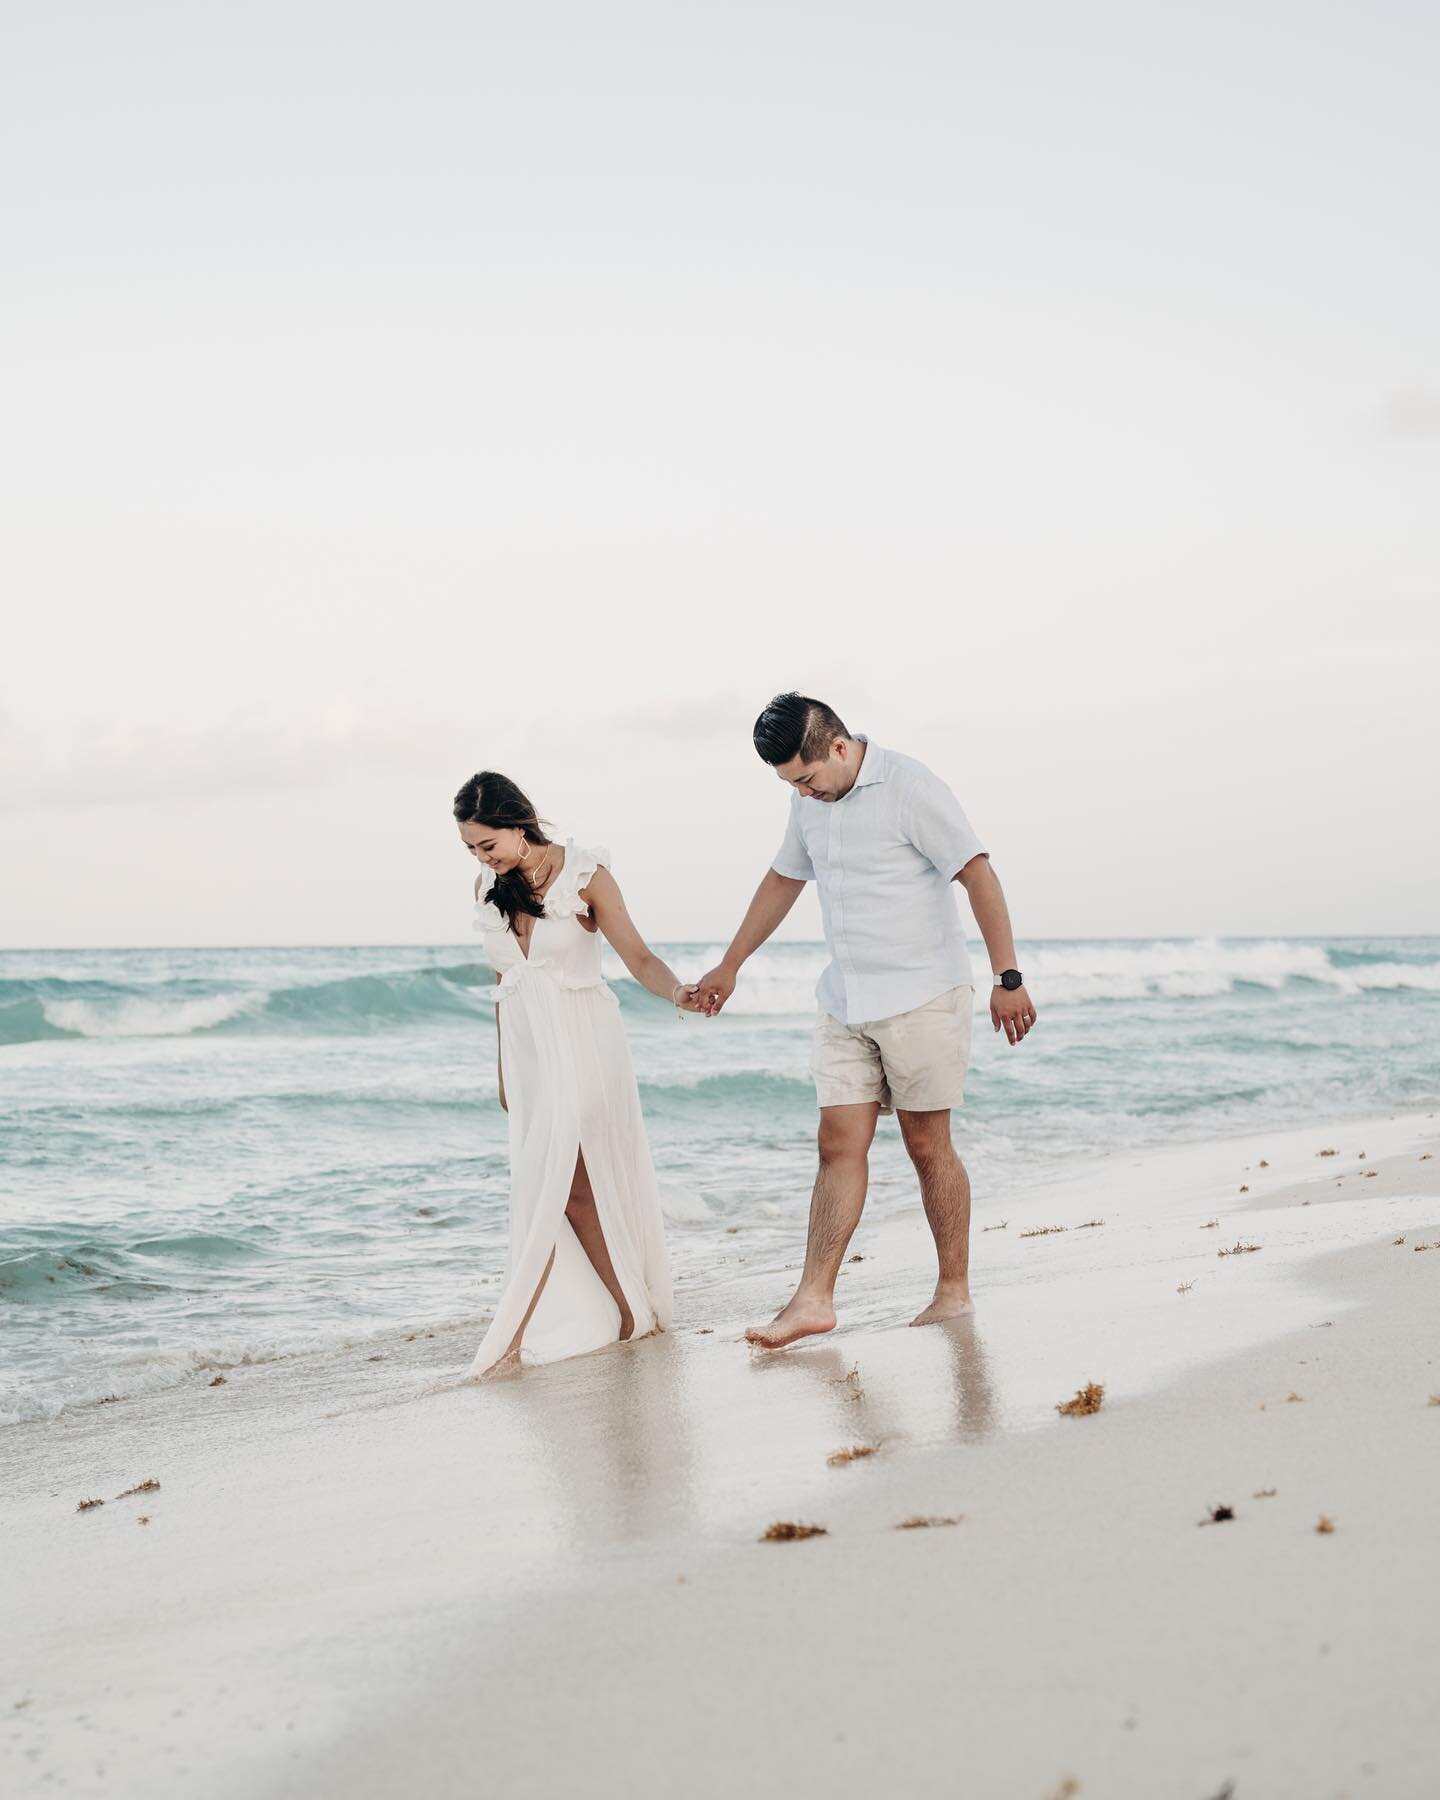 Swipe to find out what a pair of soulmates holding hands looks like .
🤍✨💫
Shooting for @flytographer .
.

#love #photography #weddingphotographer #couplephotographer #wedding #cancunwedding #tulumwedding